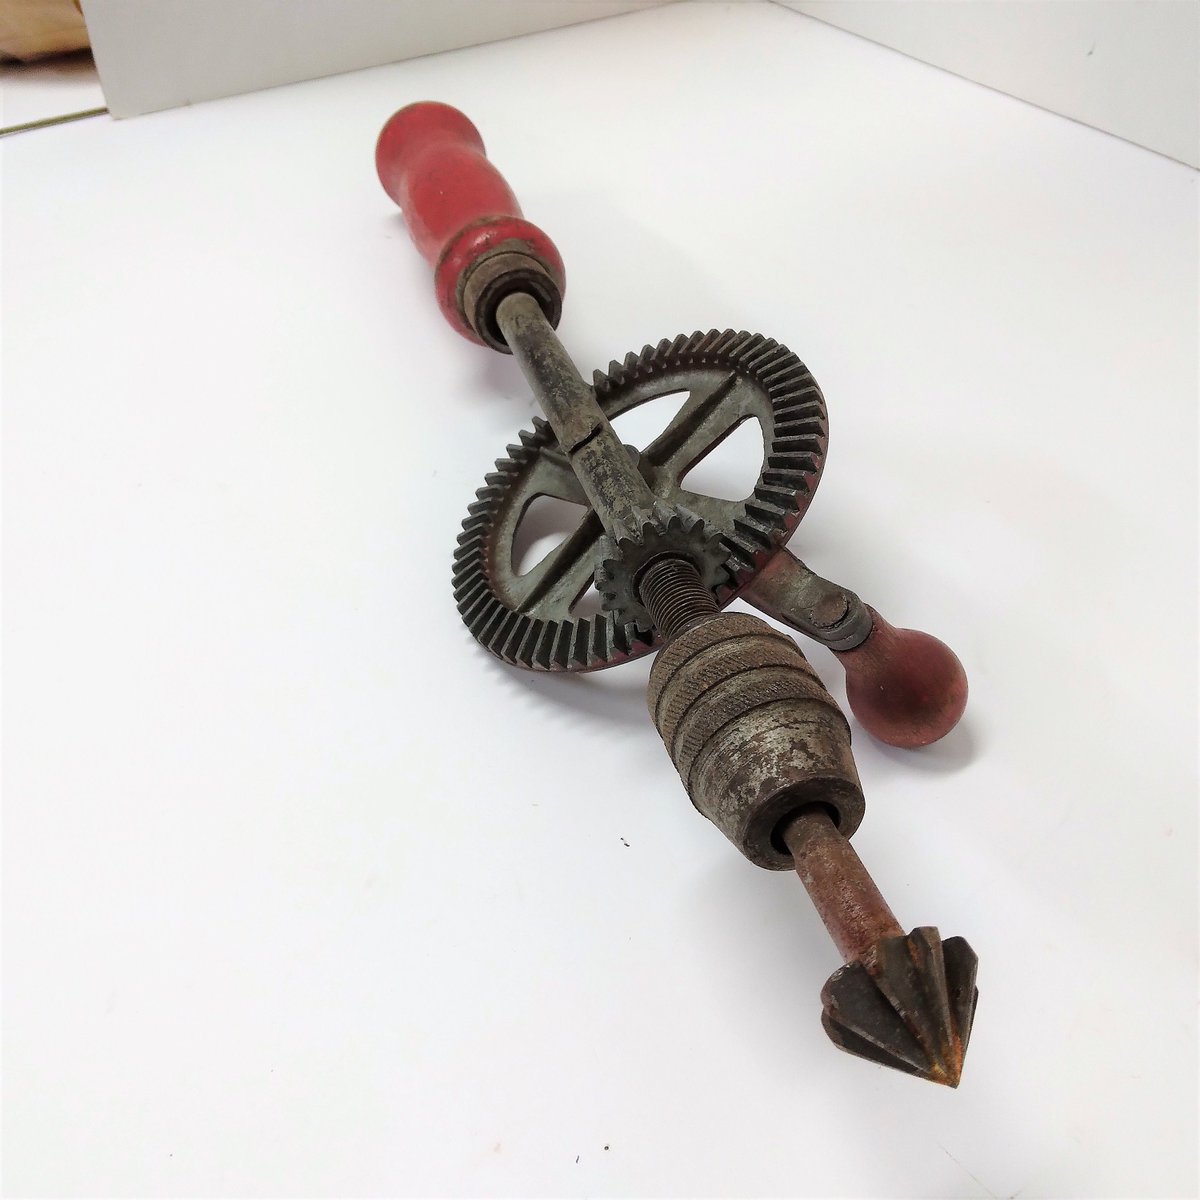 Excited to share the latest addition to my #etsy shop: Vintage Egg Beater Hand Crank Drill with Red Paint and Wood Handle-Antique1920 etsy.me/3zhYwcq #red #hand #copper #eggbeater #handcrank #handdrill #collector #RecycledBirdSuites